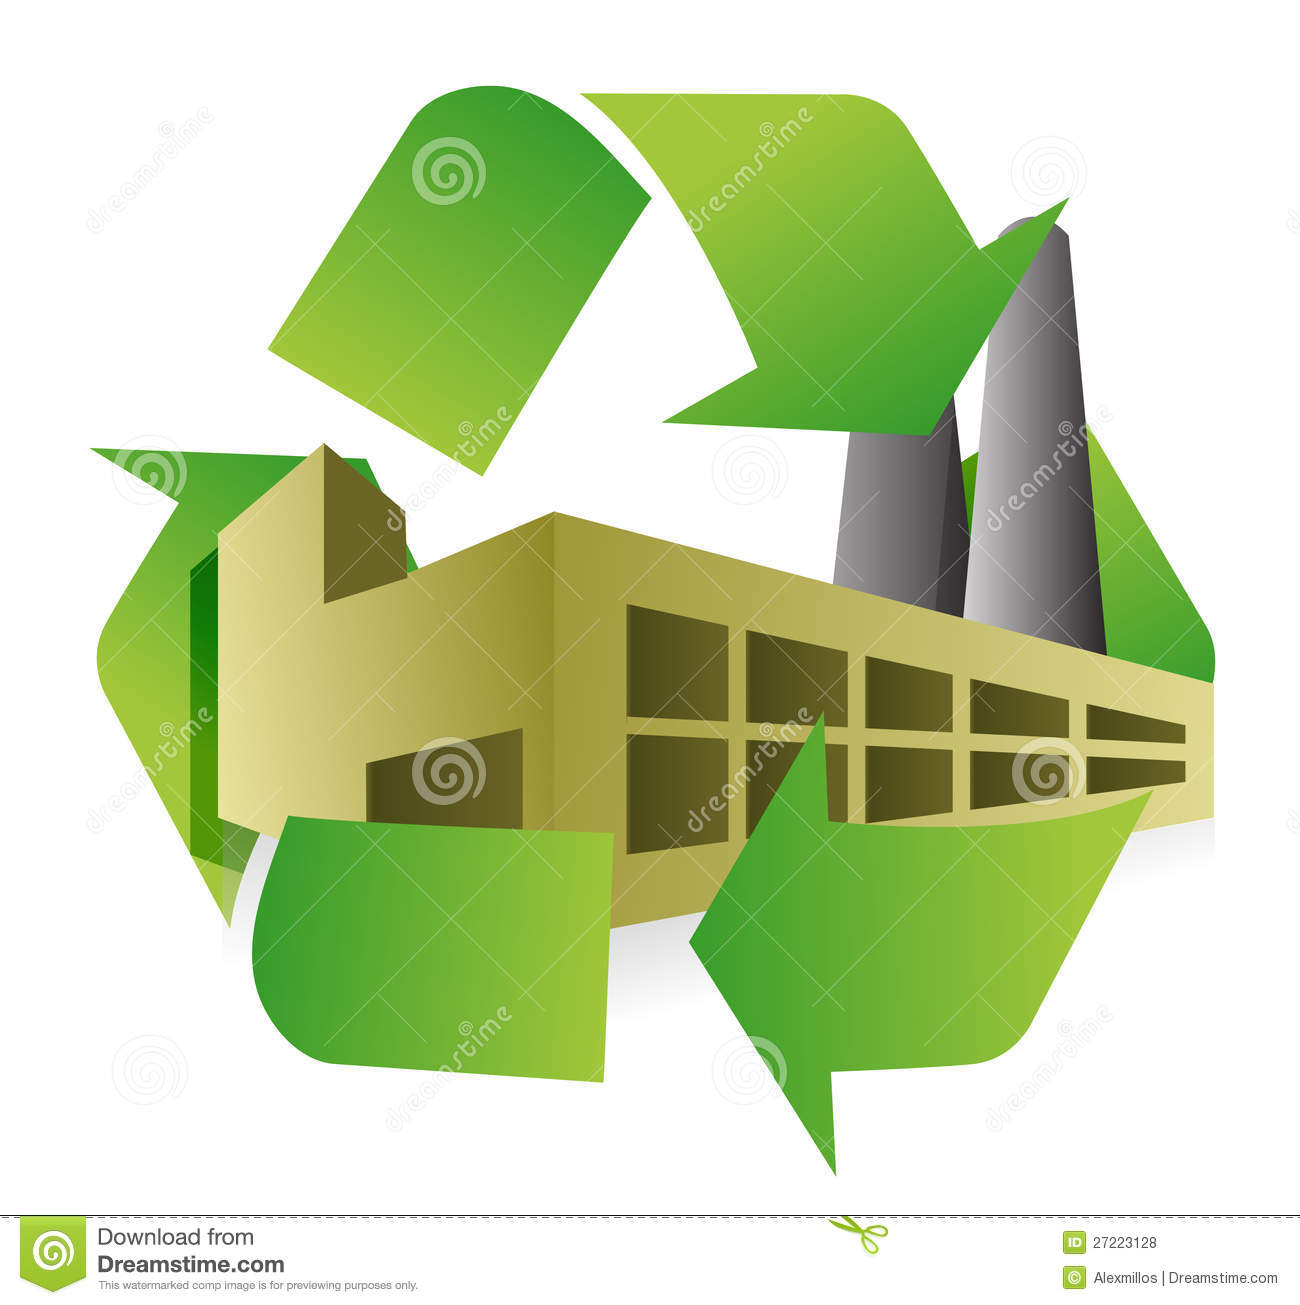 Recycle Factory Illustration Design Royalty Free Stock Photos   Image